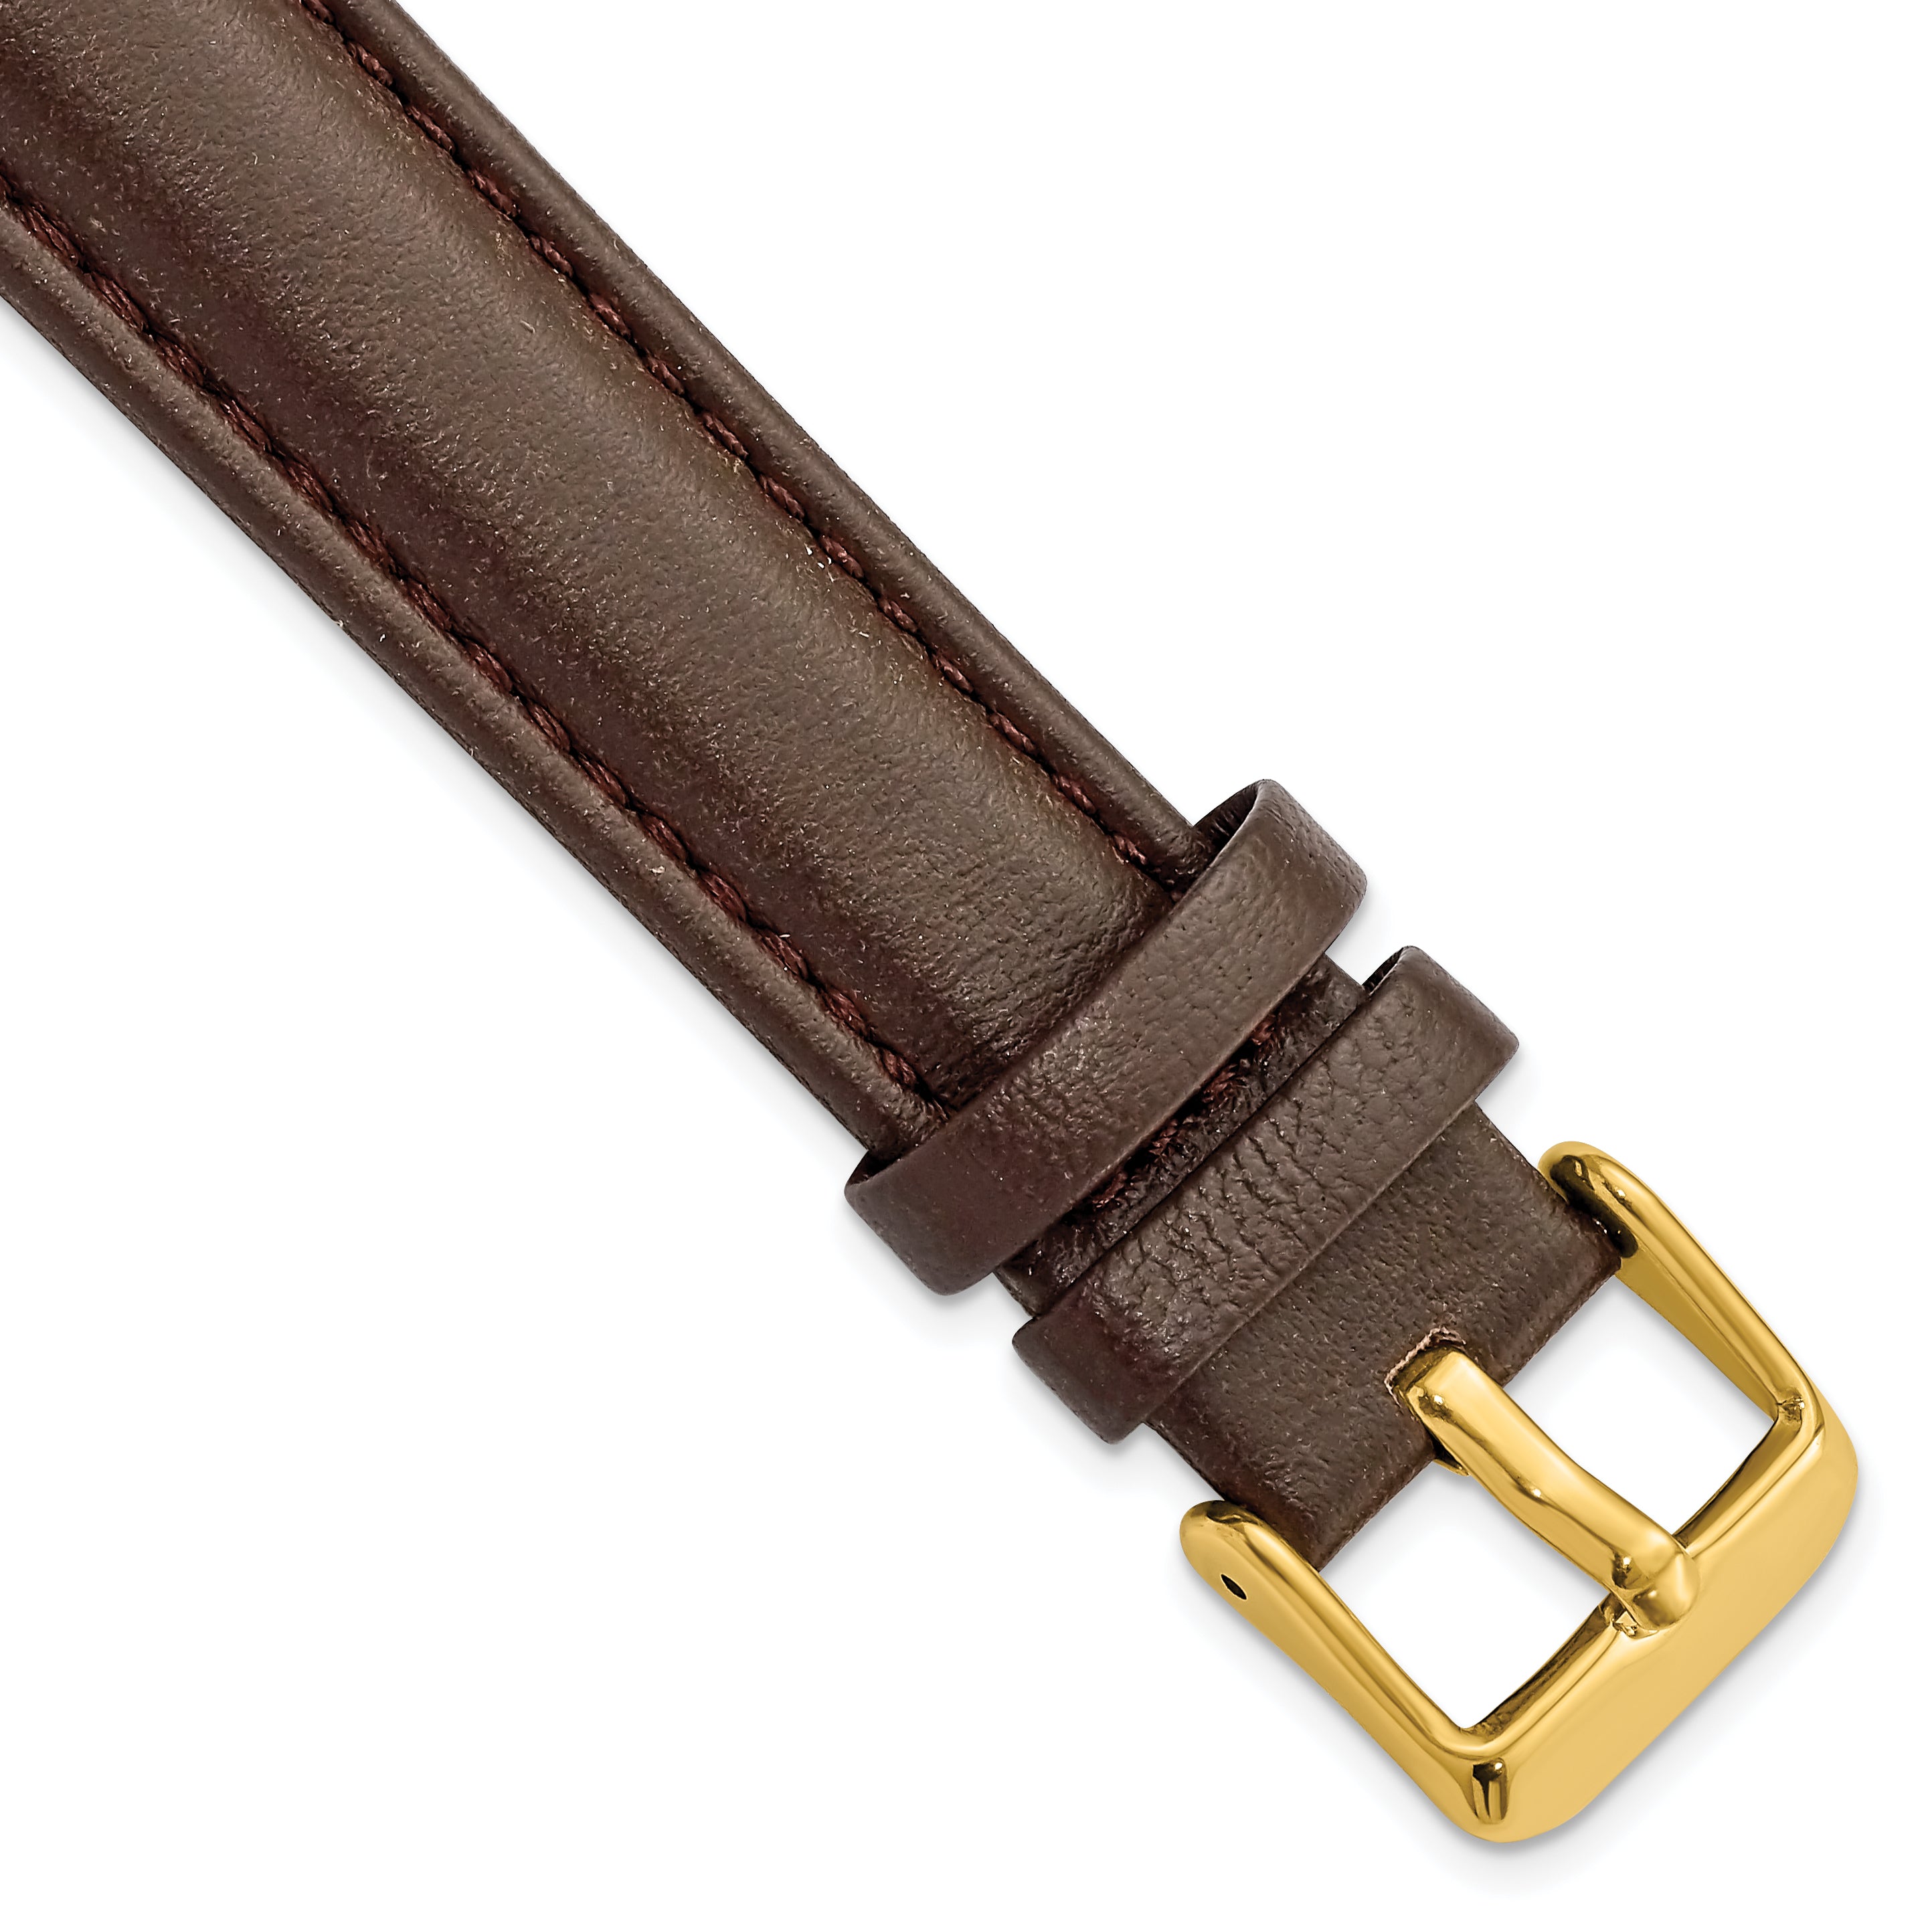 DeBeer 18mm Dark Brown Glove Leather with Gold-tone Panerai Style Buckle 7.75 inch Watch Band